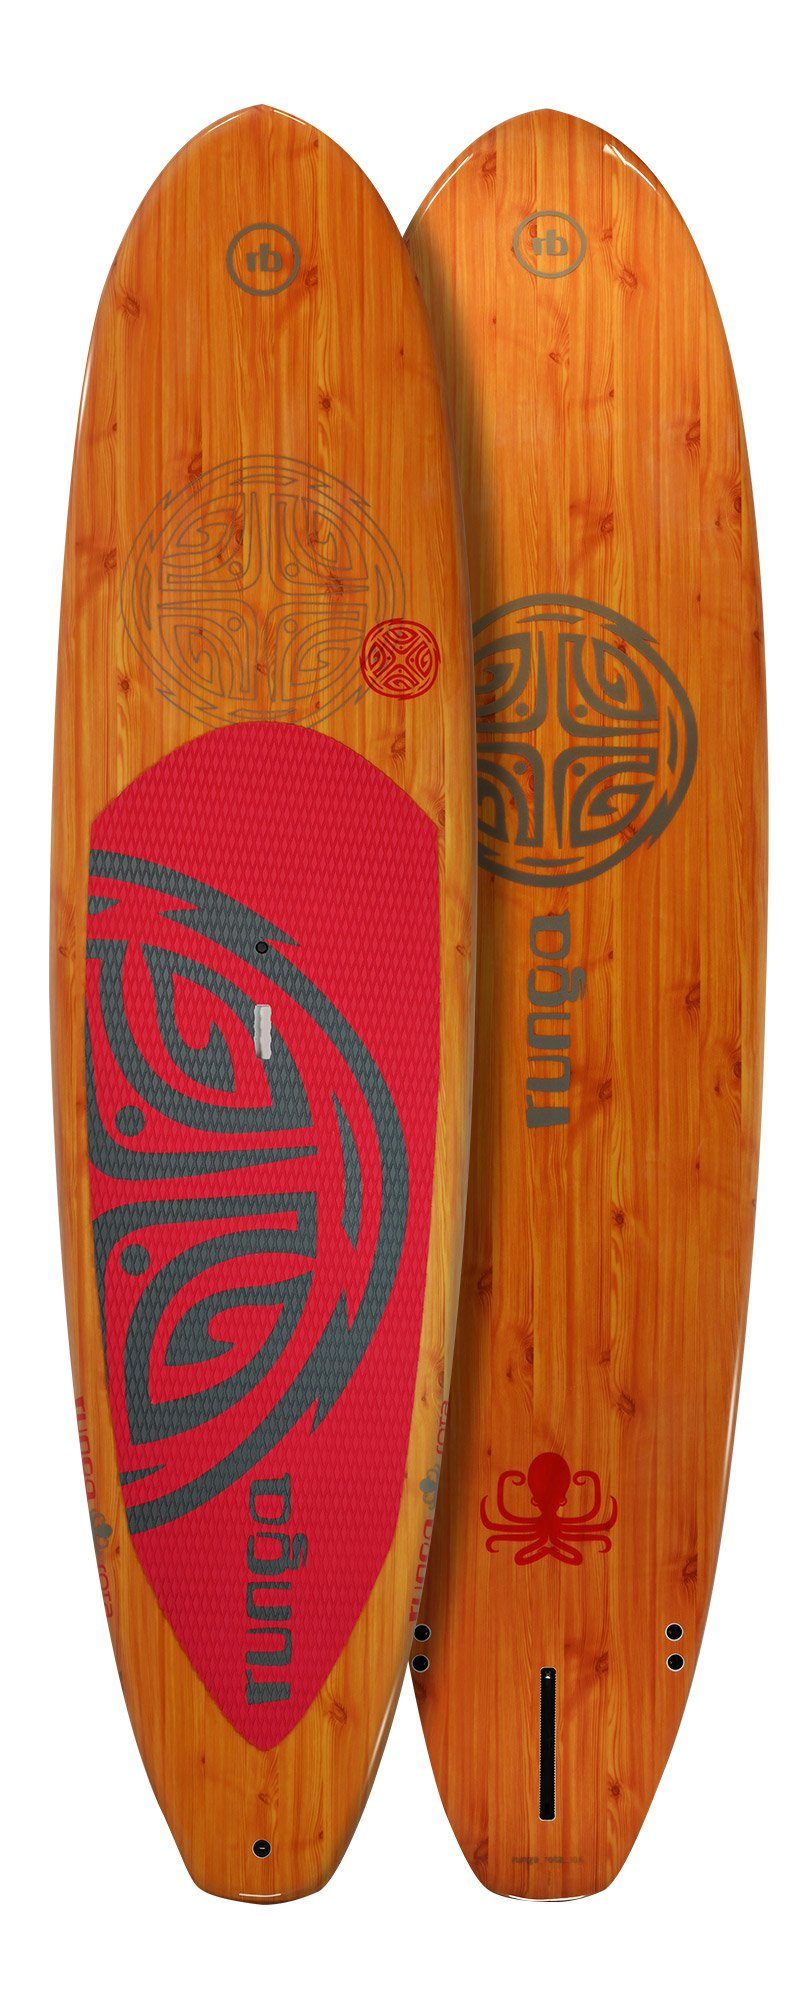 Runga-Boards SUP-Board Allrounder, ROTA Finnen-Set) Hard & SUP, 3-tlg. RED Stand Inkl. Up Paddling Board leash coiled (9.6